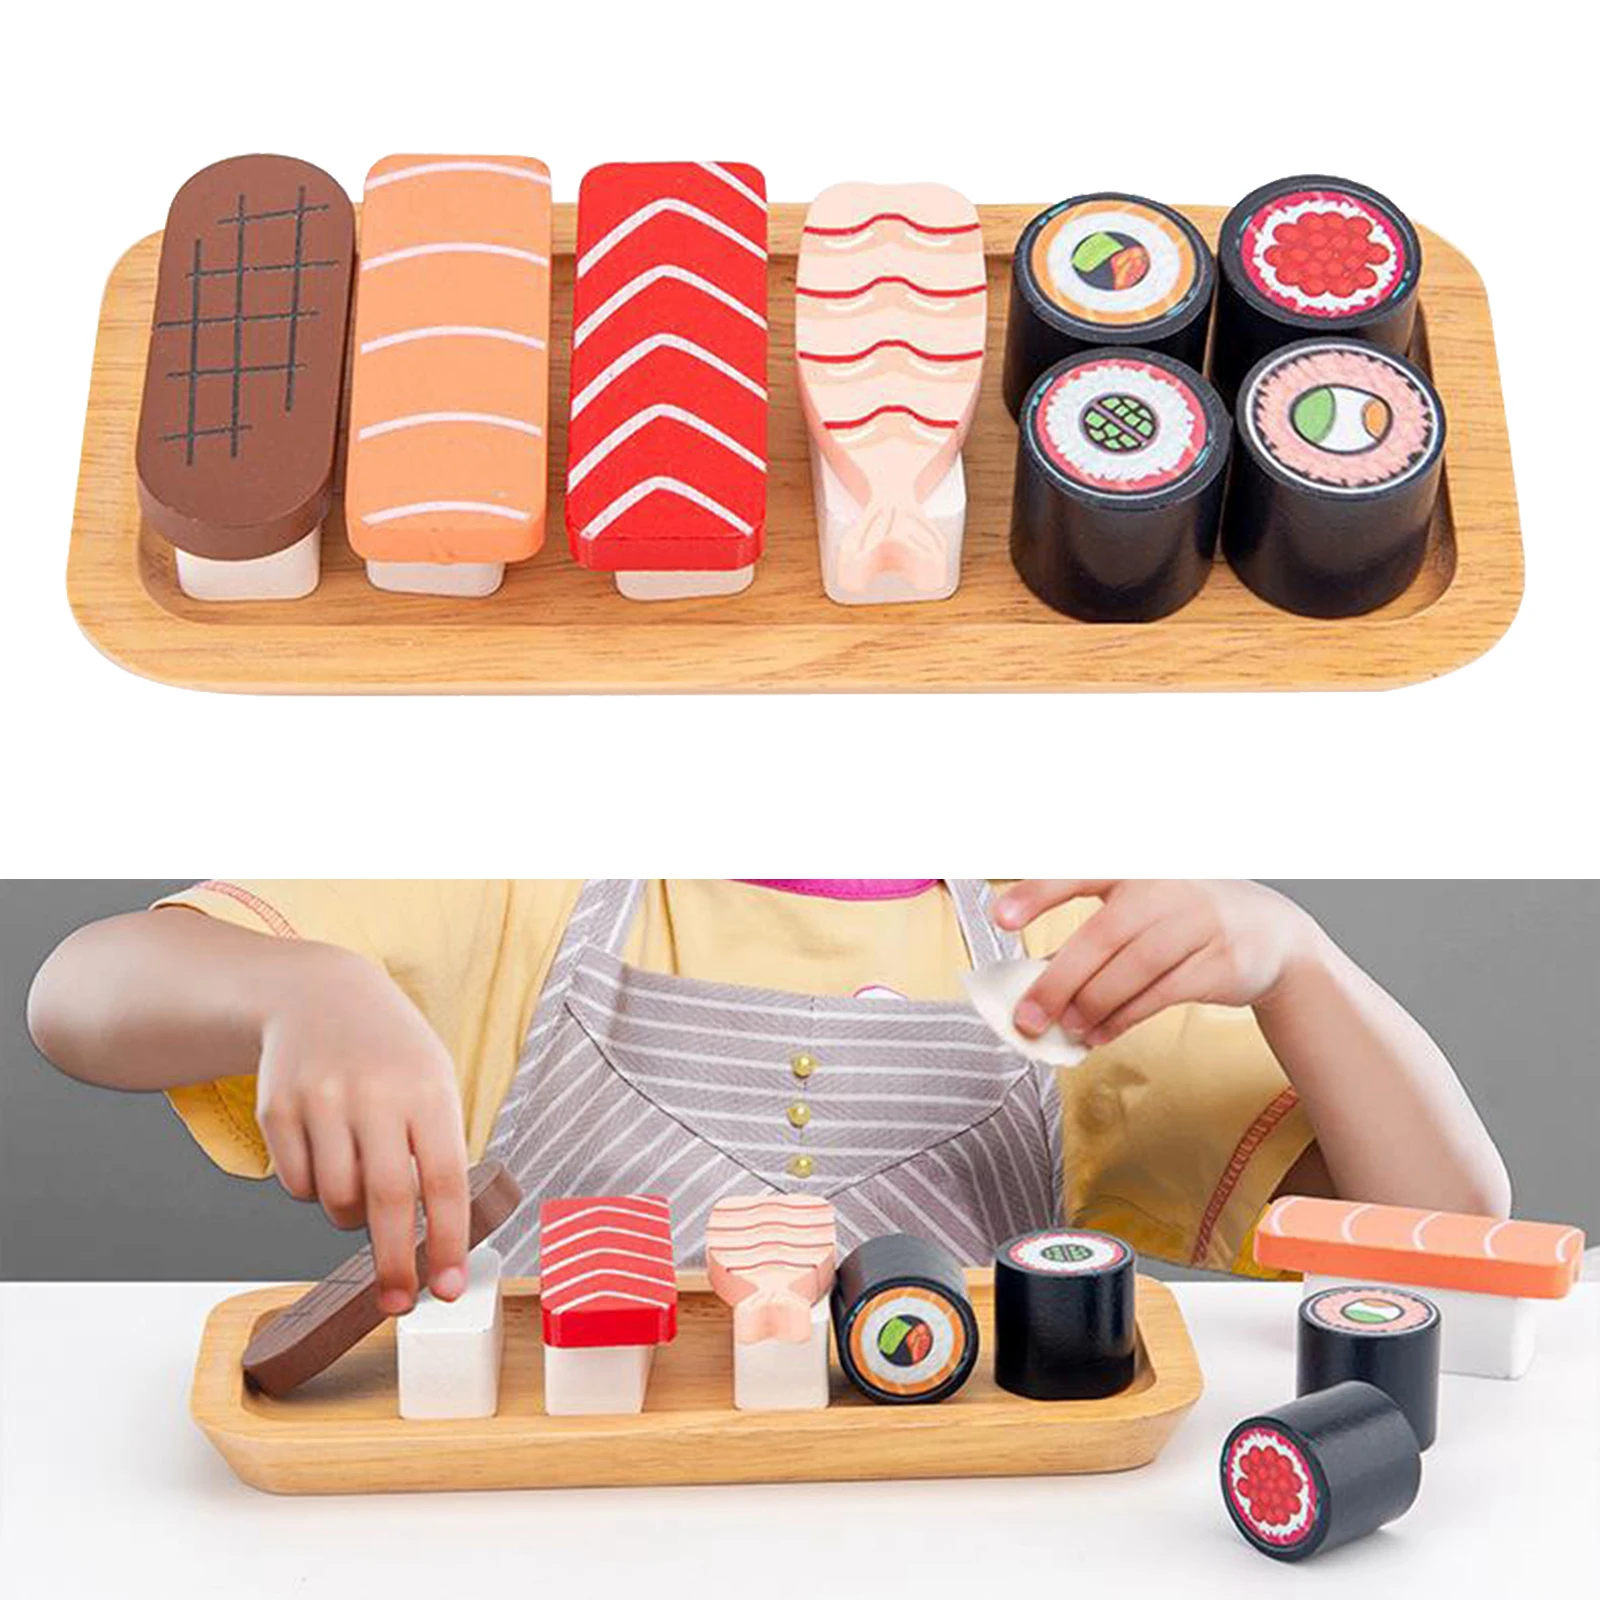 Sushi Toys Wooden Food Set Pretend Role Play Food Set Kitchen Accessories